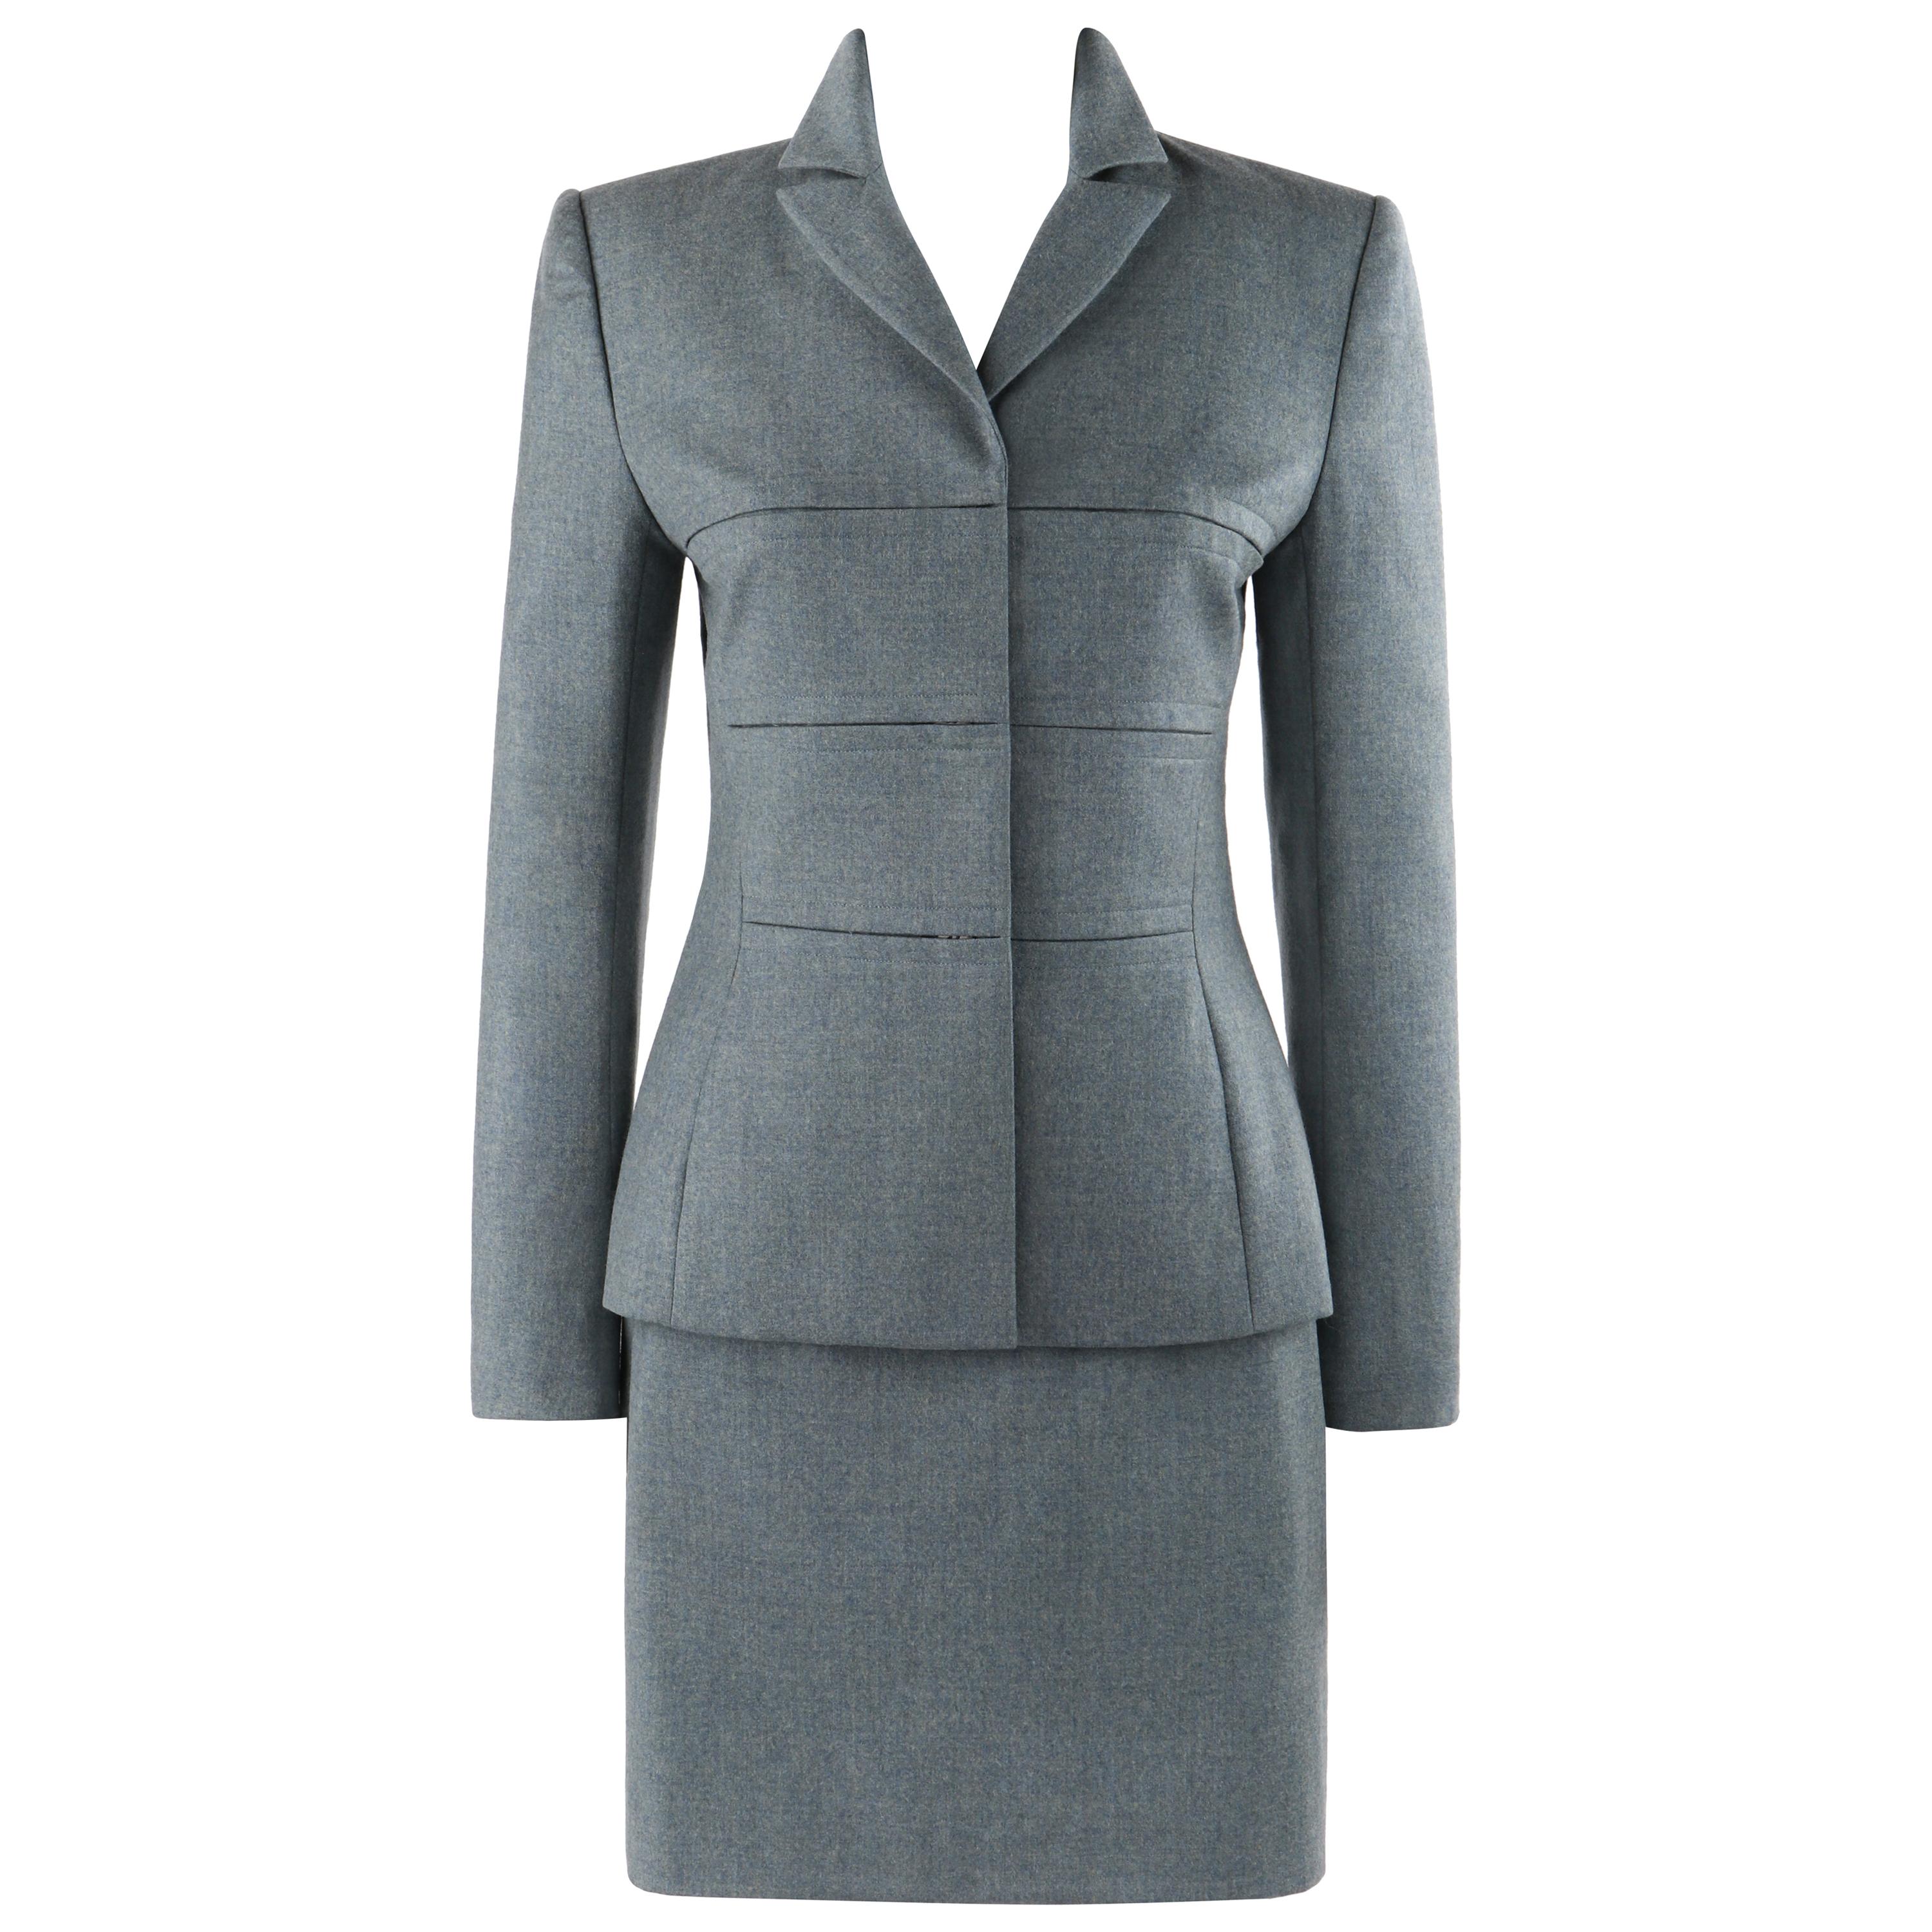 GIVENCHY Couture A/W 1998 ALEXANDER McQUEEN Blue Gray Tailored Blazer Skirt Suit For Sale